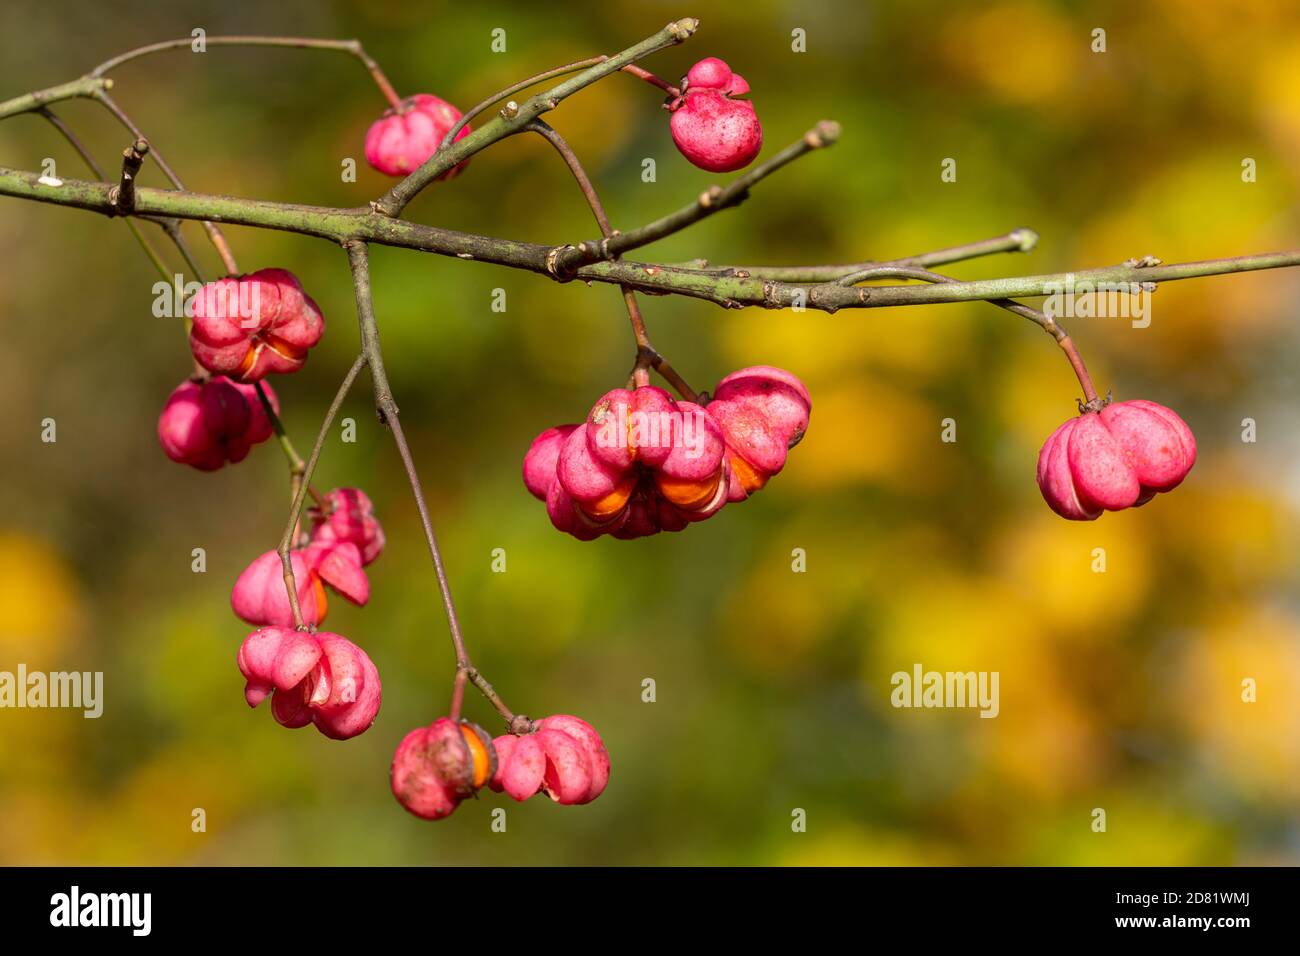 Close-up of brightly coloured spindle berries, pink and orange fruits of the spindle tree (Euonymus europaeus) Stock Photo